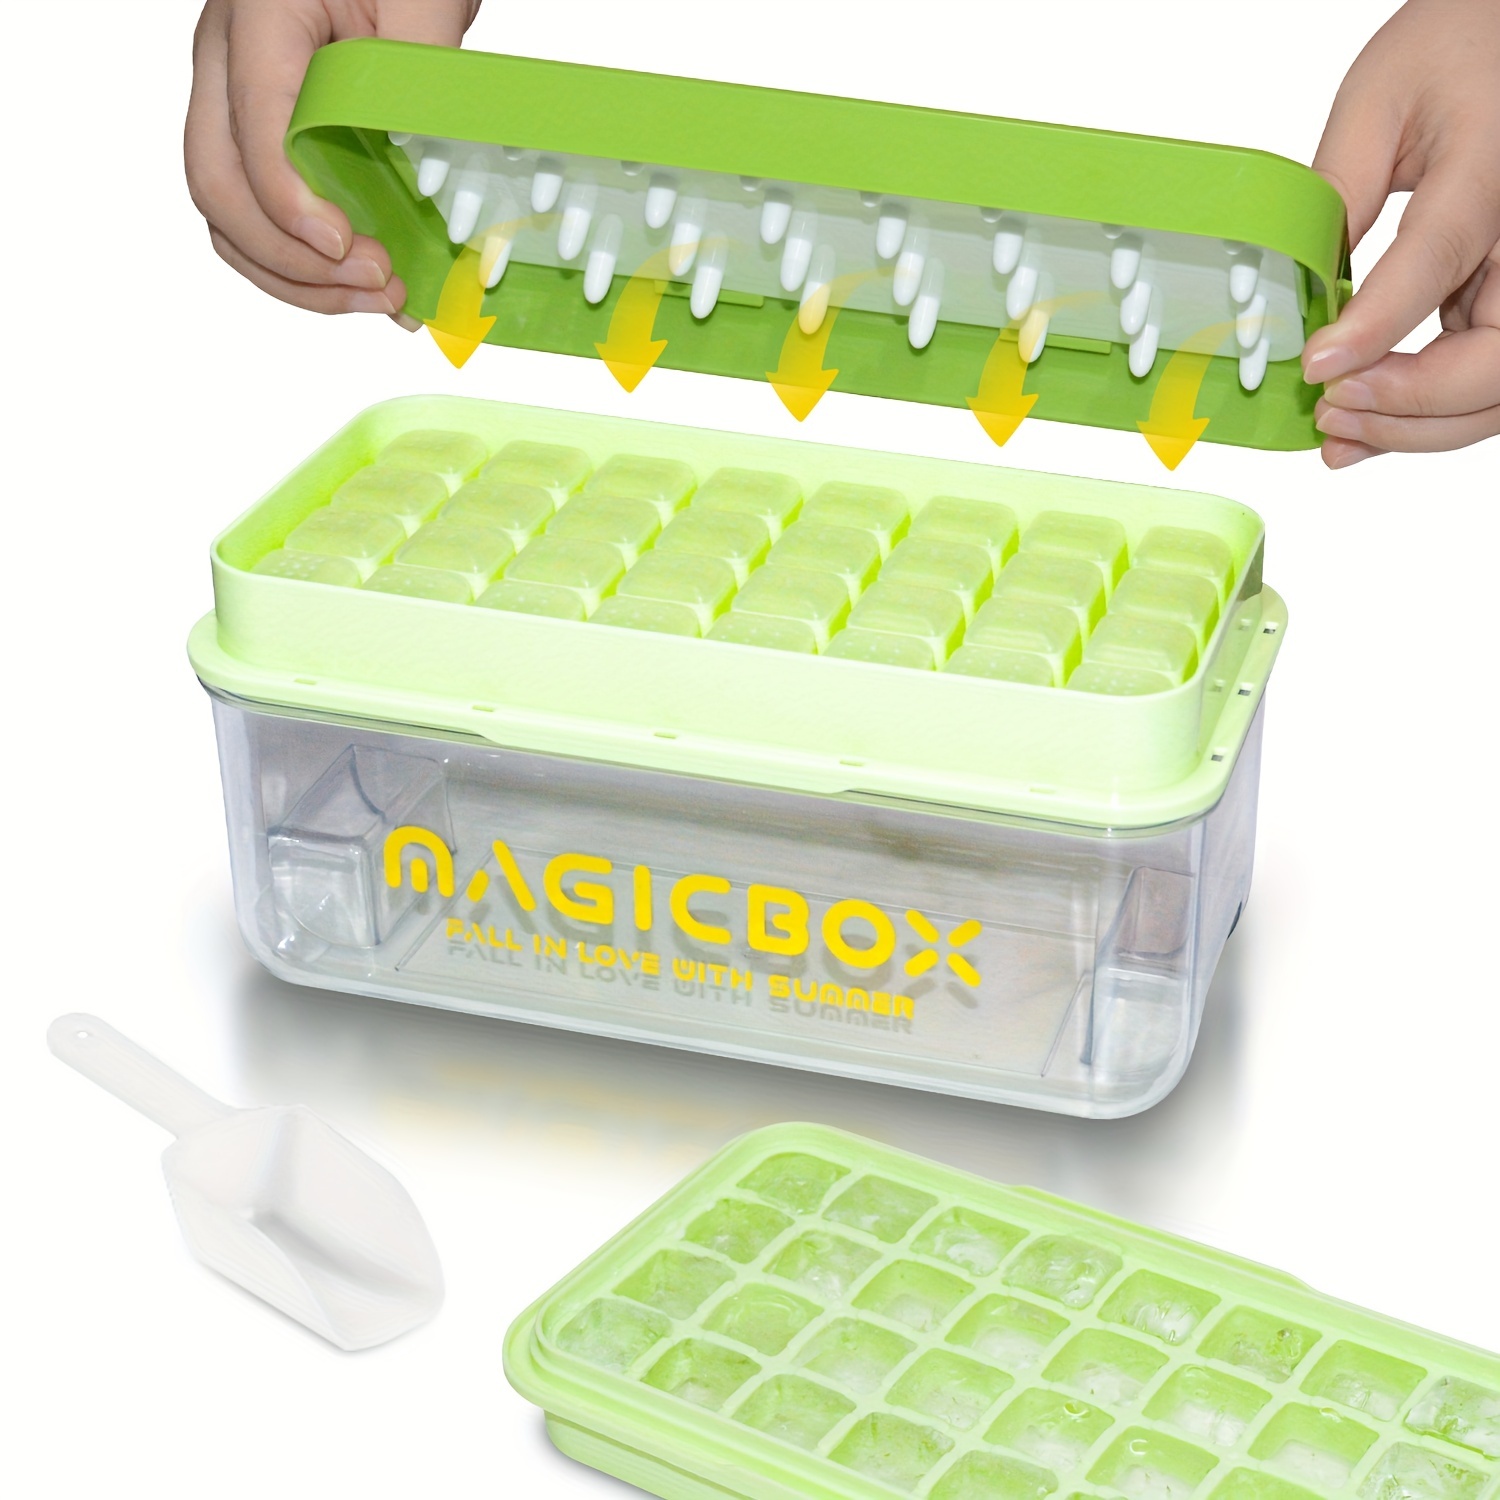 Arogan Double Layer Ice Cube Tray and Ice Box, Easy Release 72 Mini Nuggets  Ice Tray, Comes with Double Layer Ice Box, Spoon and Press Type Lid, Soft